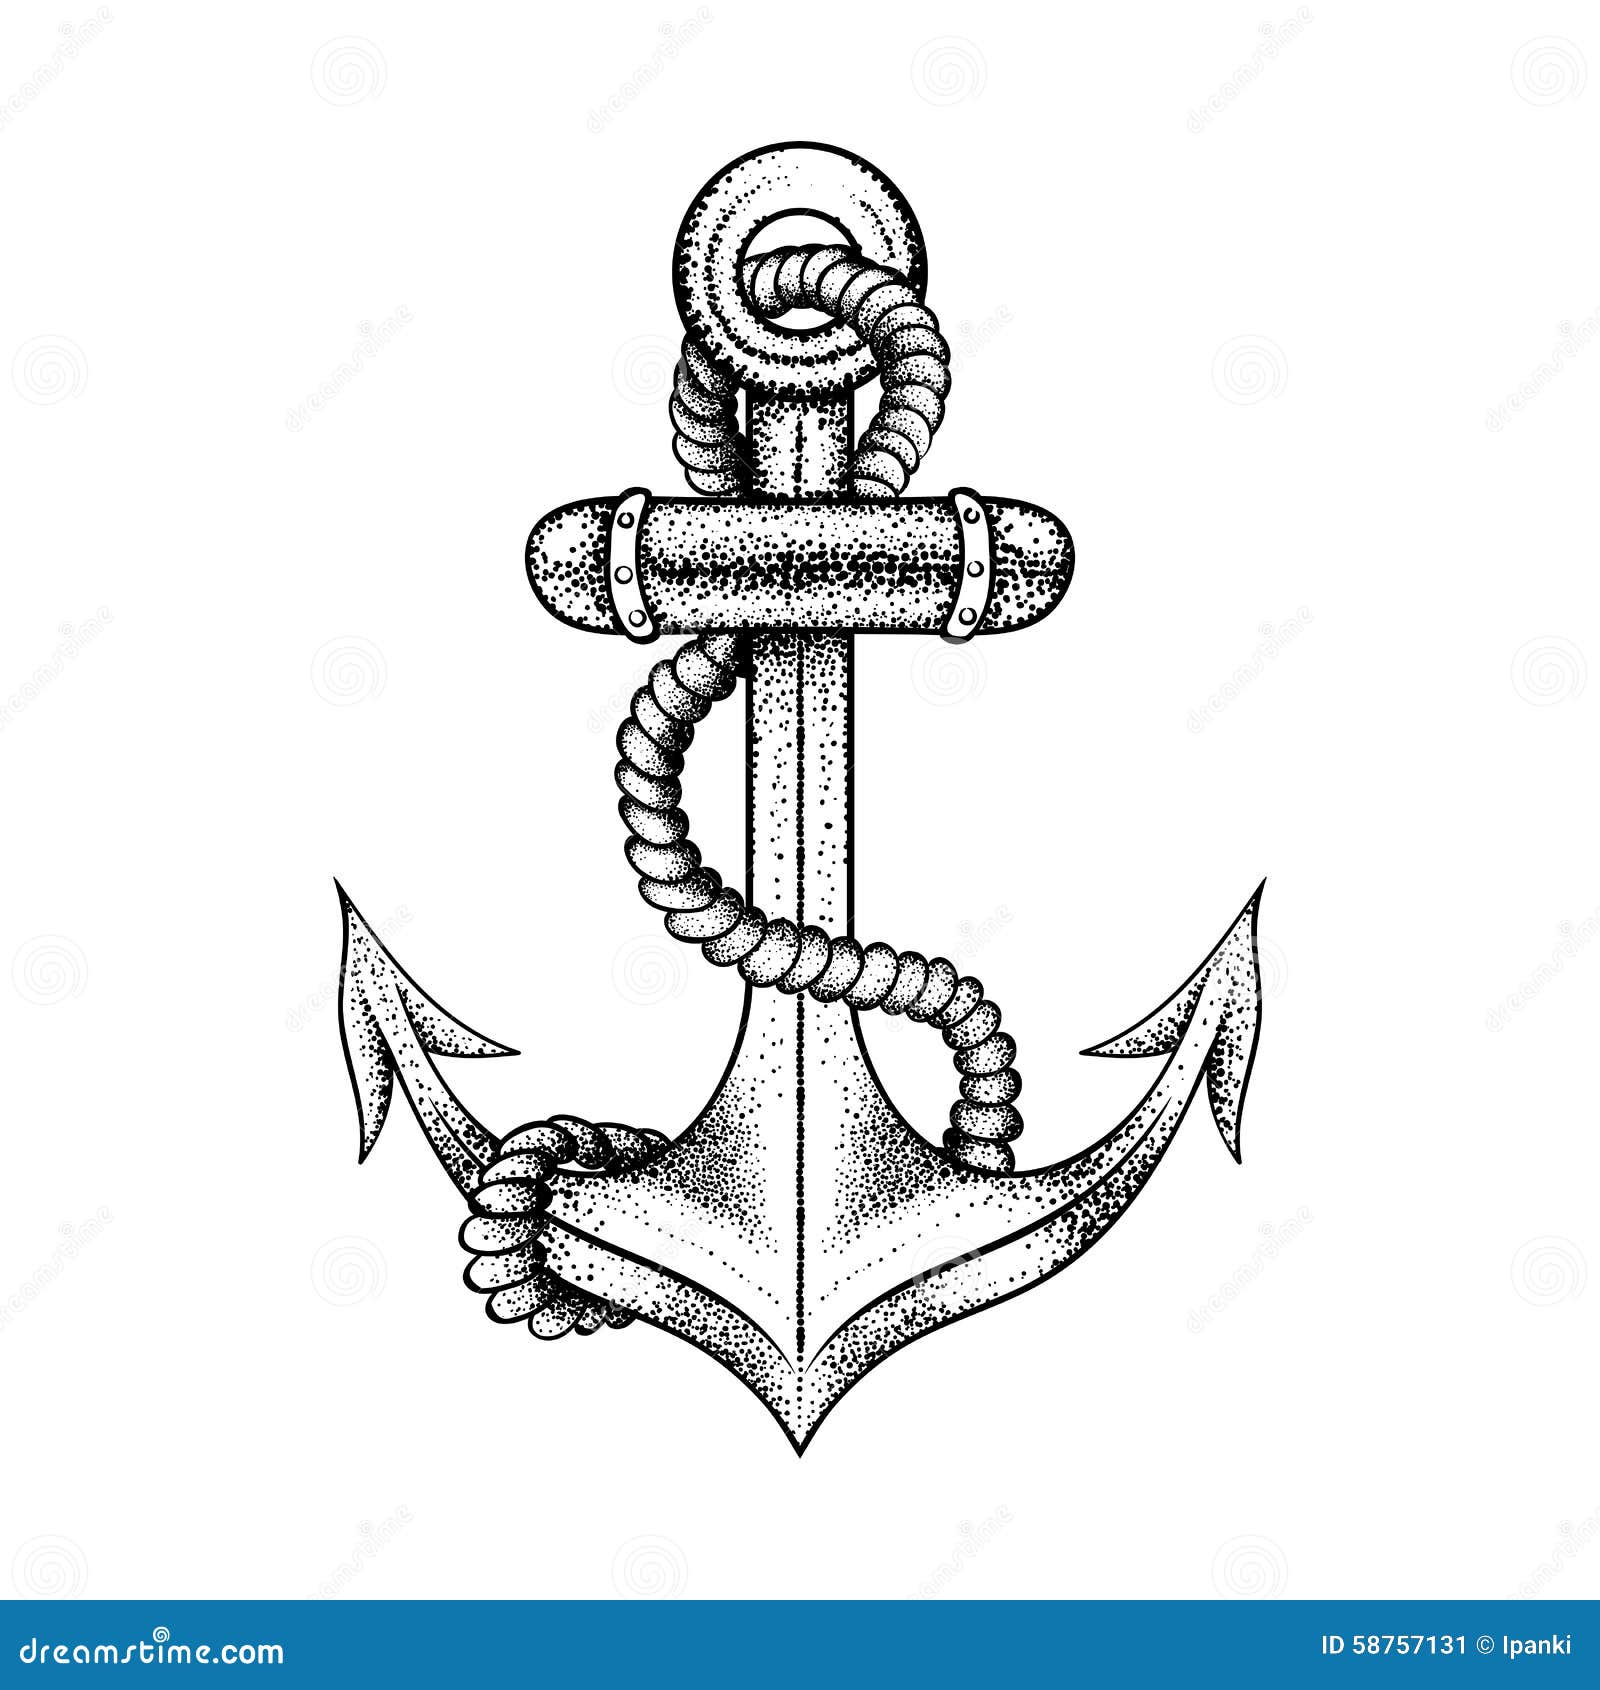 Hand Drawn Elegant Ship Sea Anchor With Rope Stock Vector ...